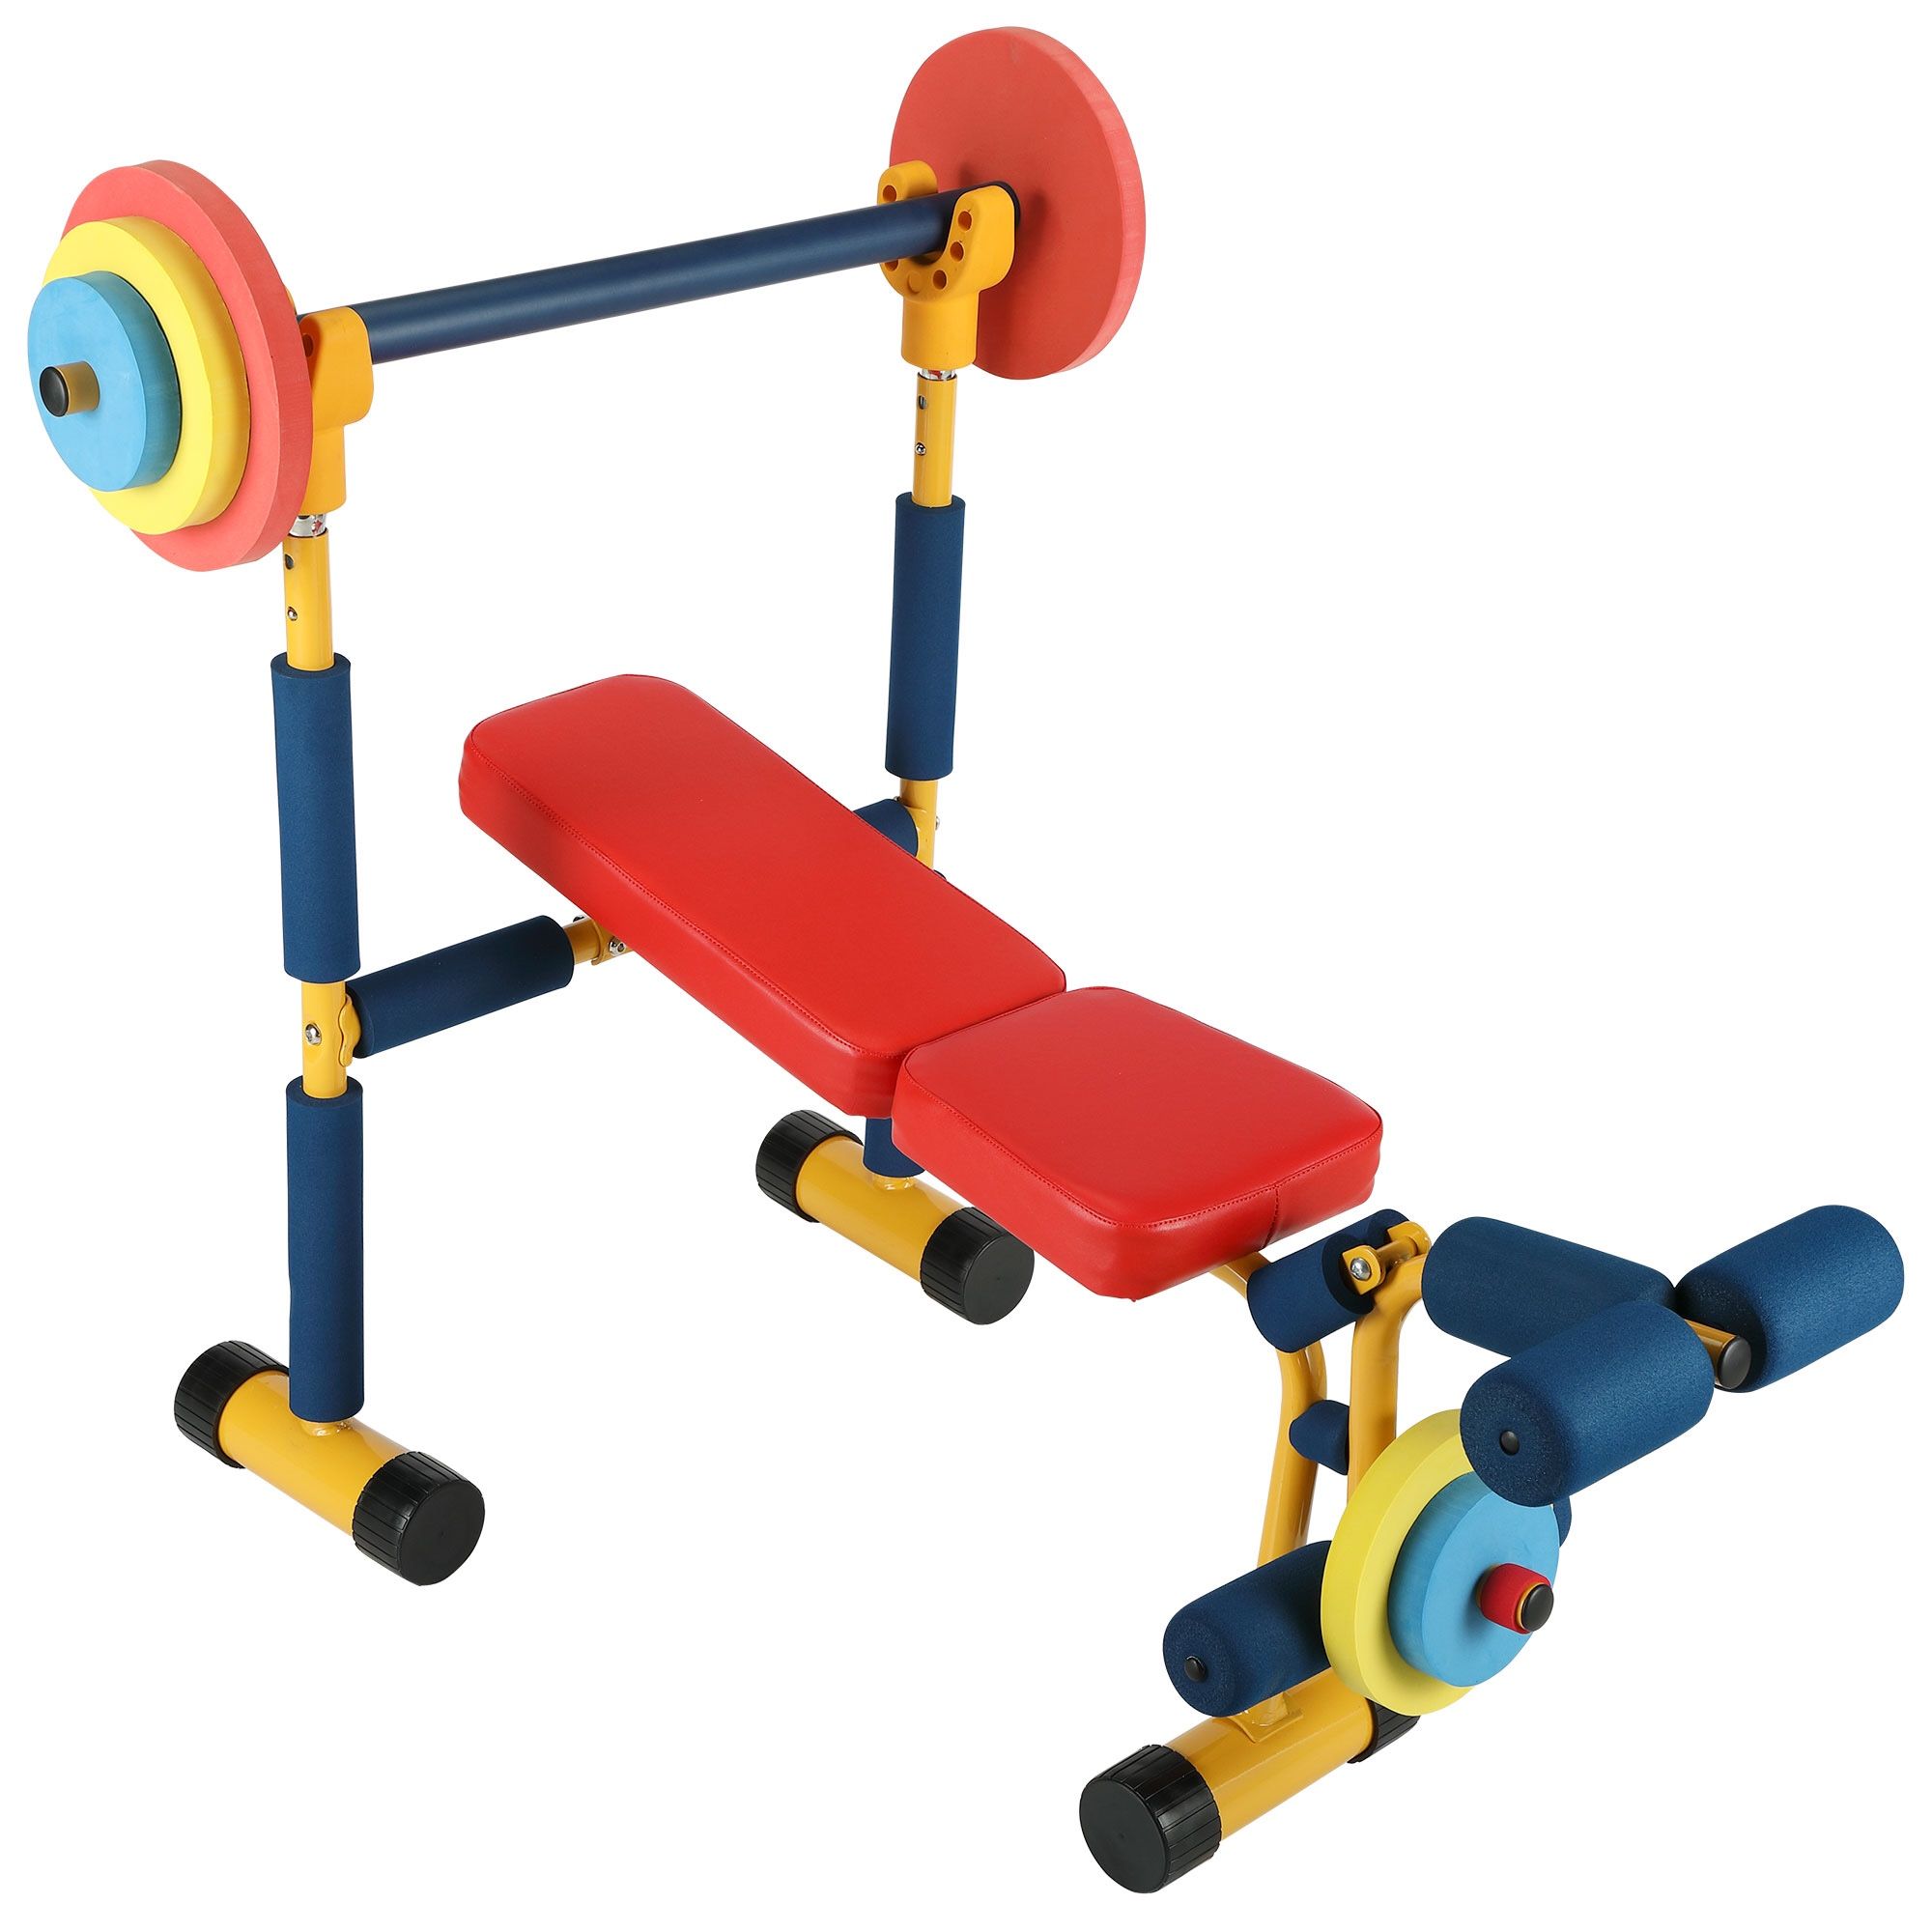 Tobbi Fun and Fitness Exercise Equipment with Multifunctional Utility- Kids Weight Bench Set Adjustable Bench Press for 3-6 years Kids